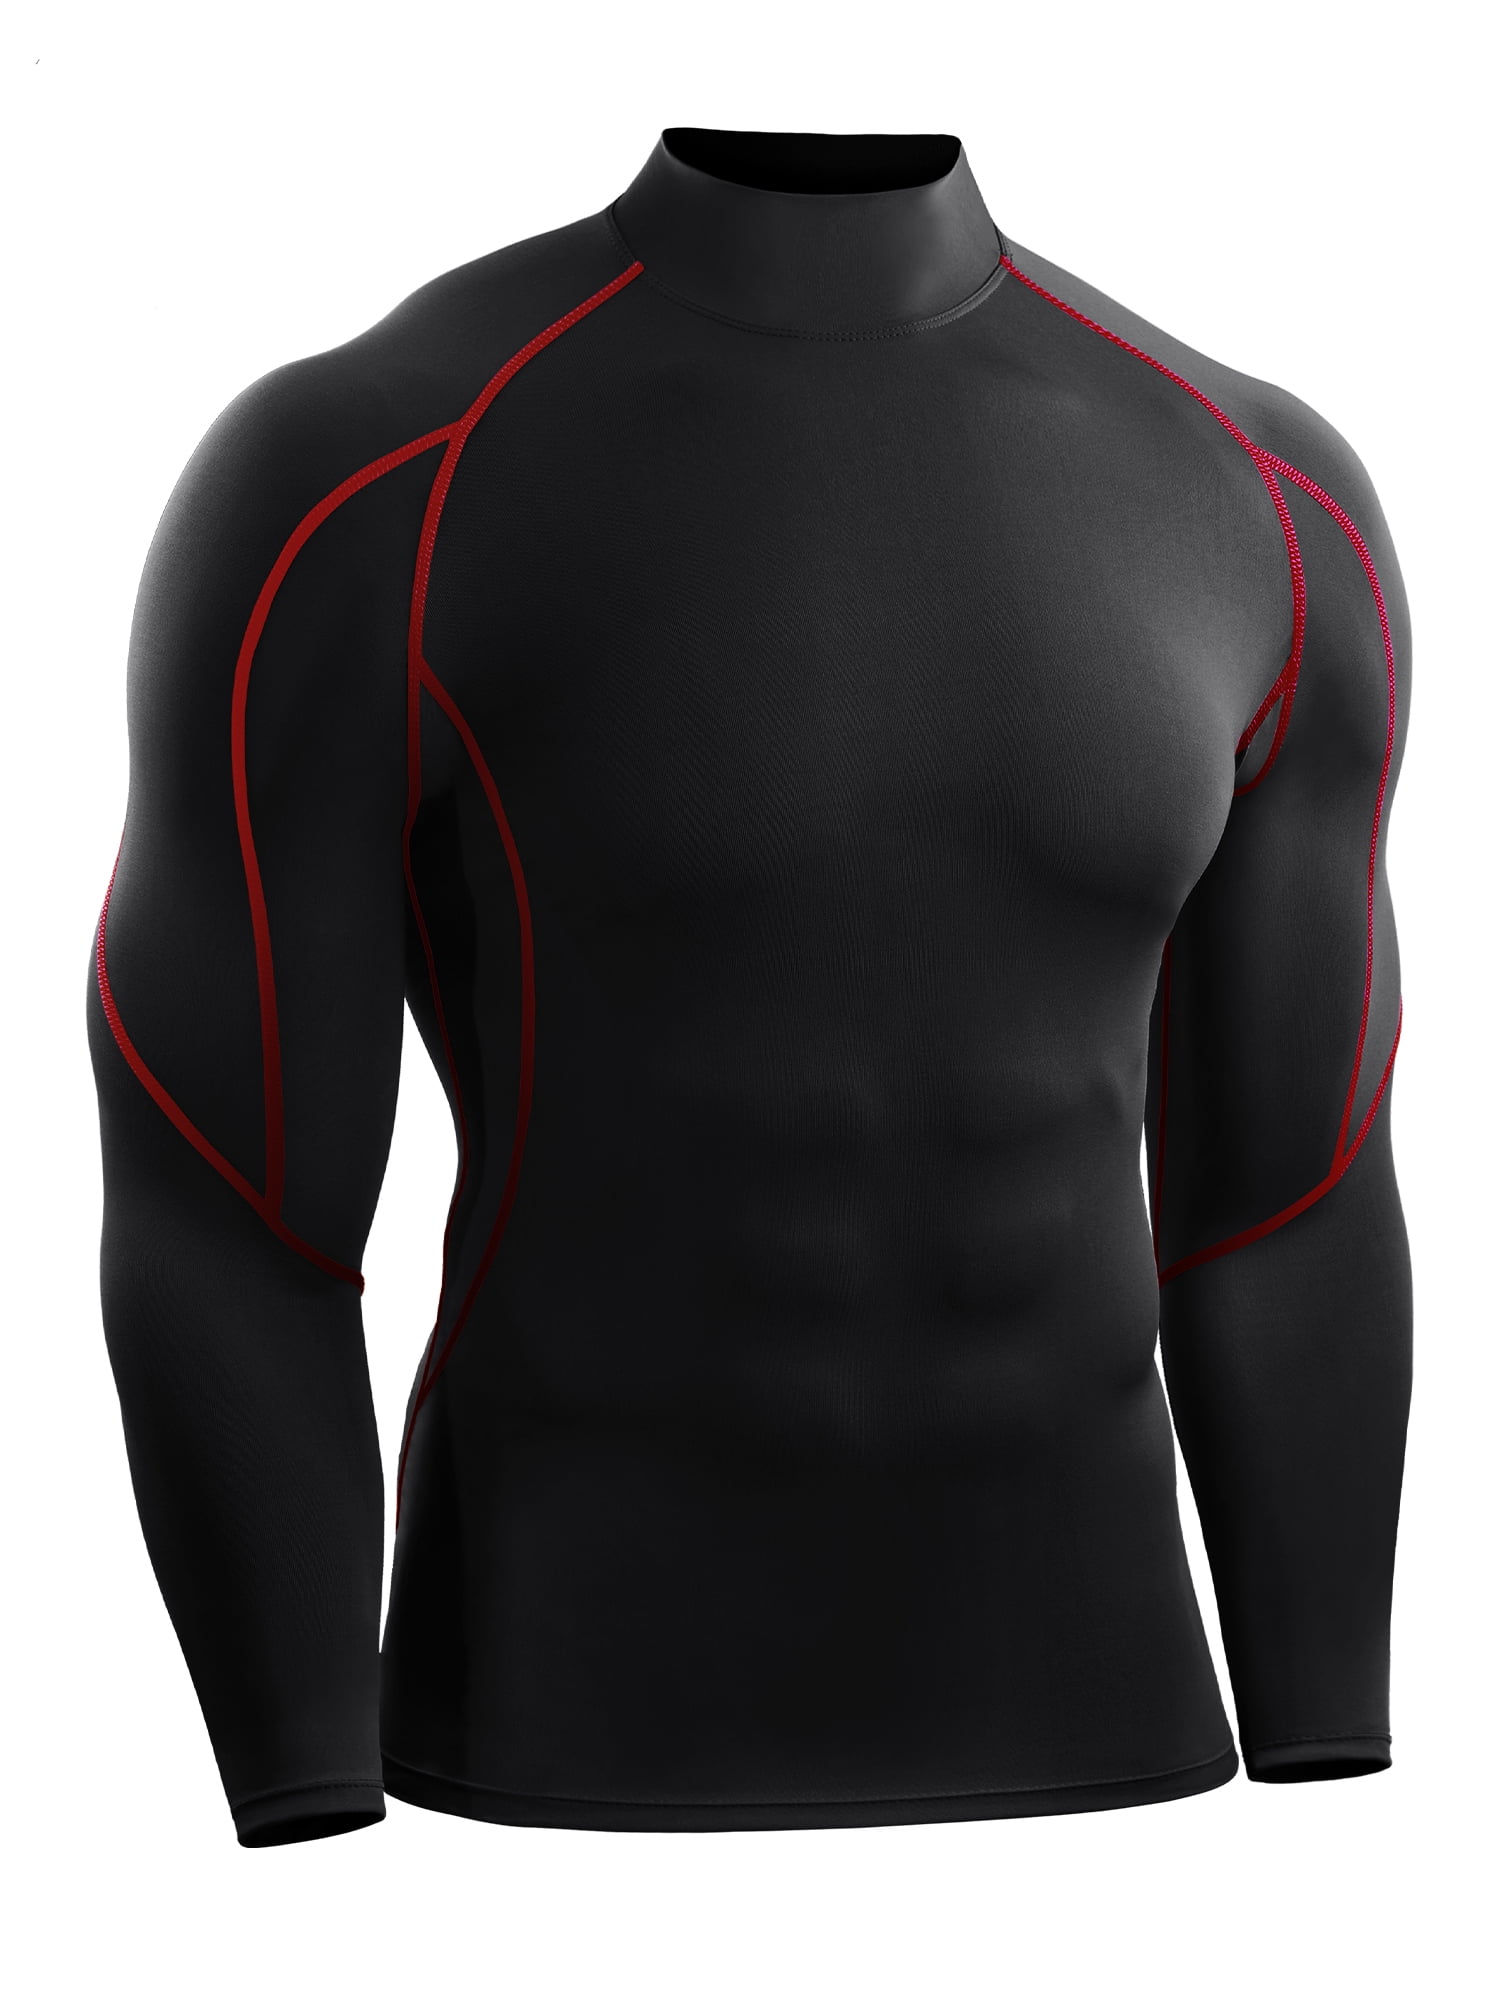 Details about   Man Compression Armour Base Layer Top Long Sleeve Thermal Gym Sports Tops Shirt 